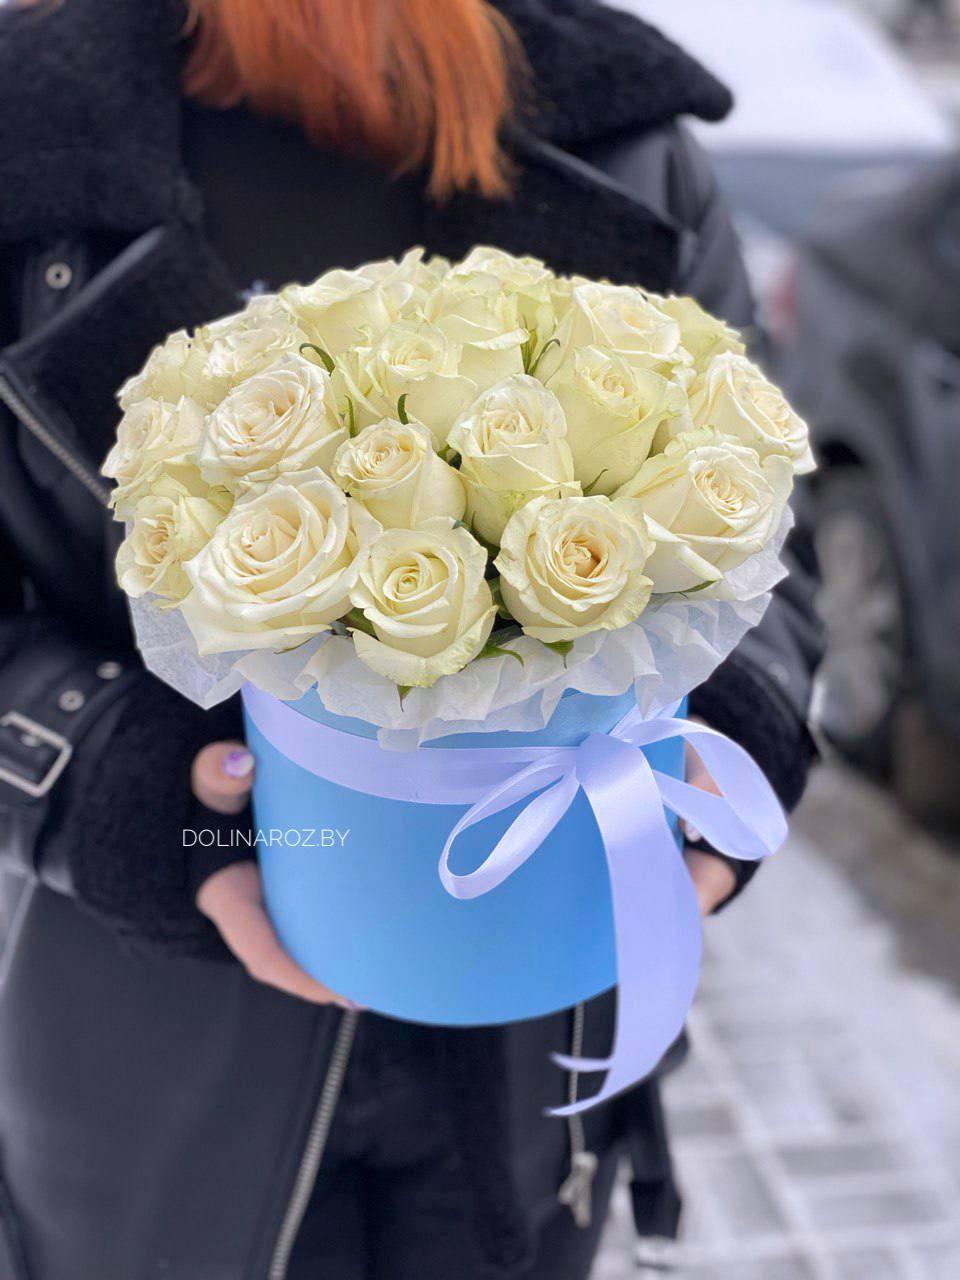 Box with 25 white roses